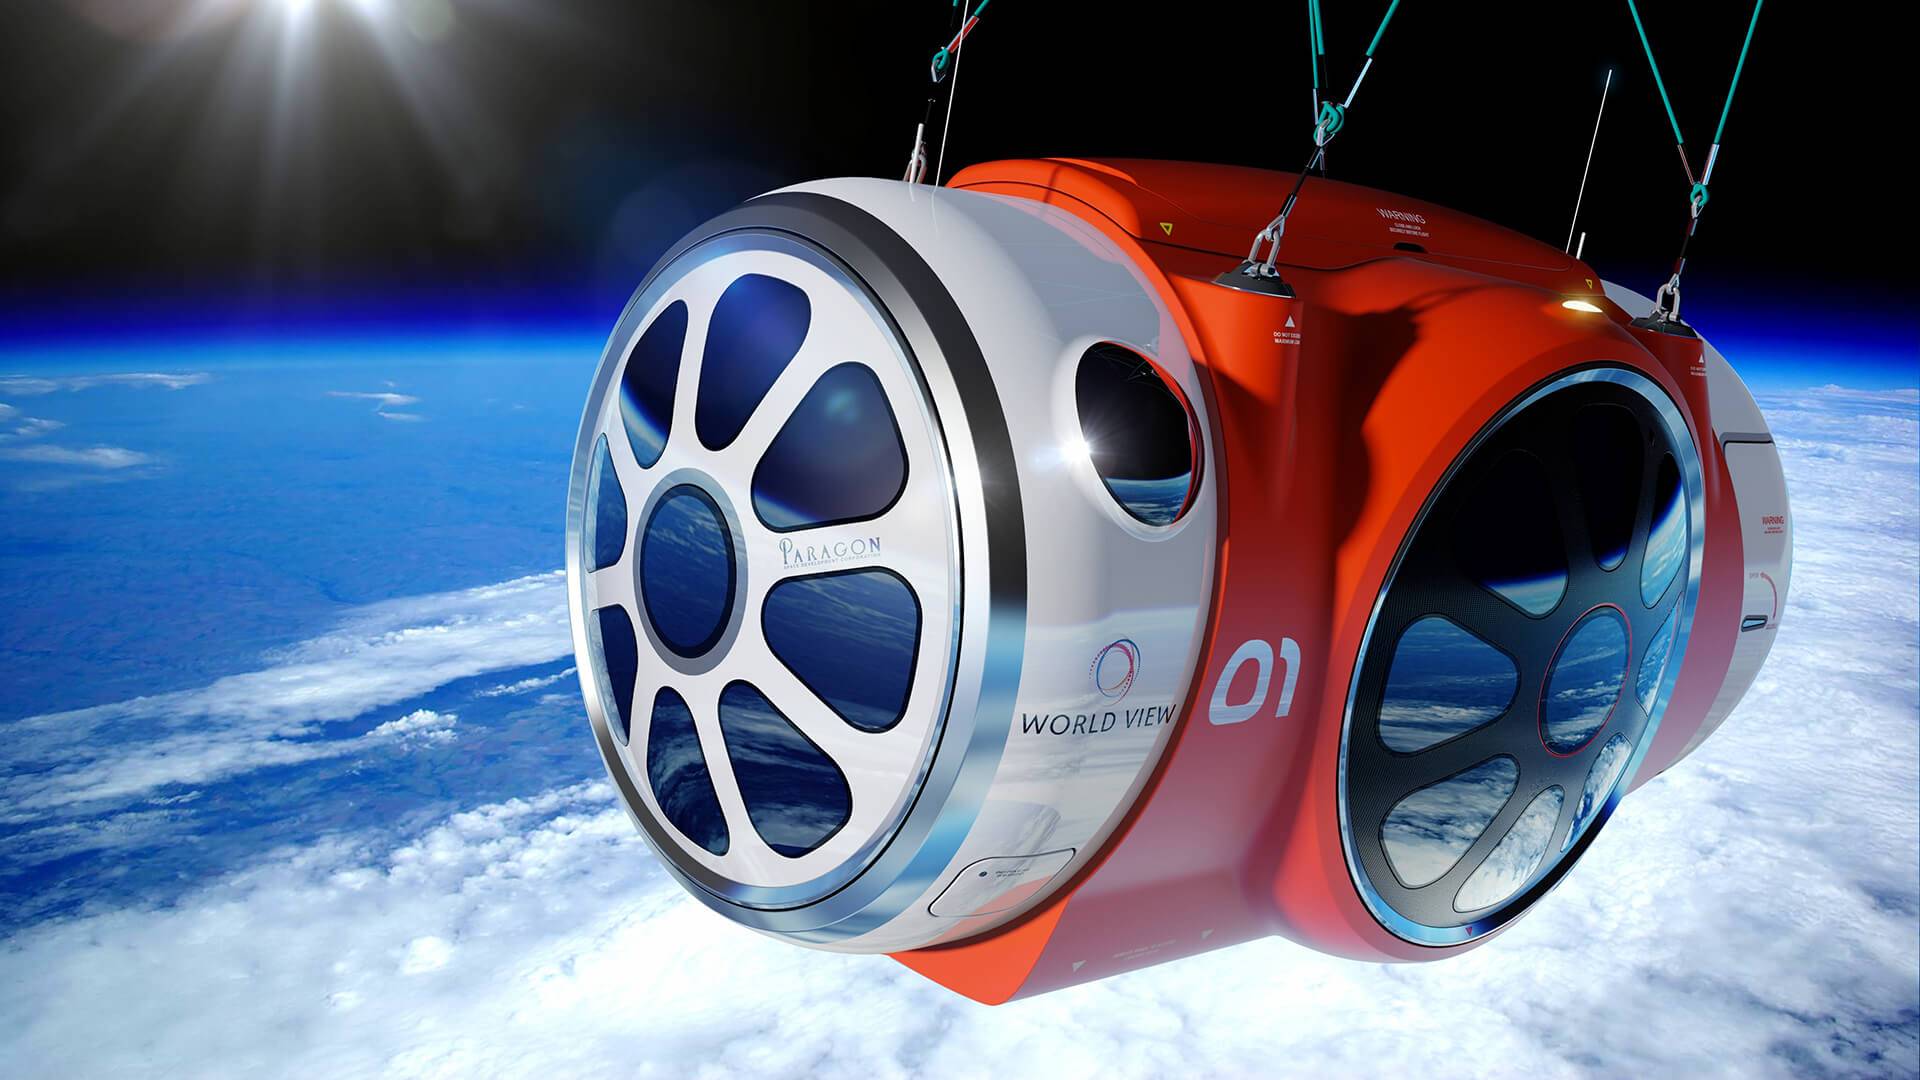 A space capsule floating in space, with the surface of the Earth and clouds seen below